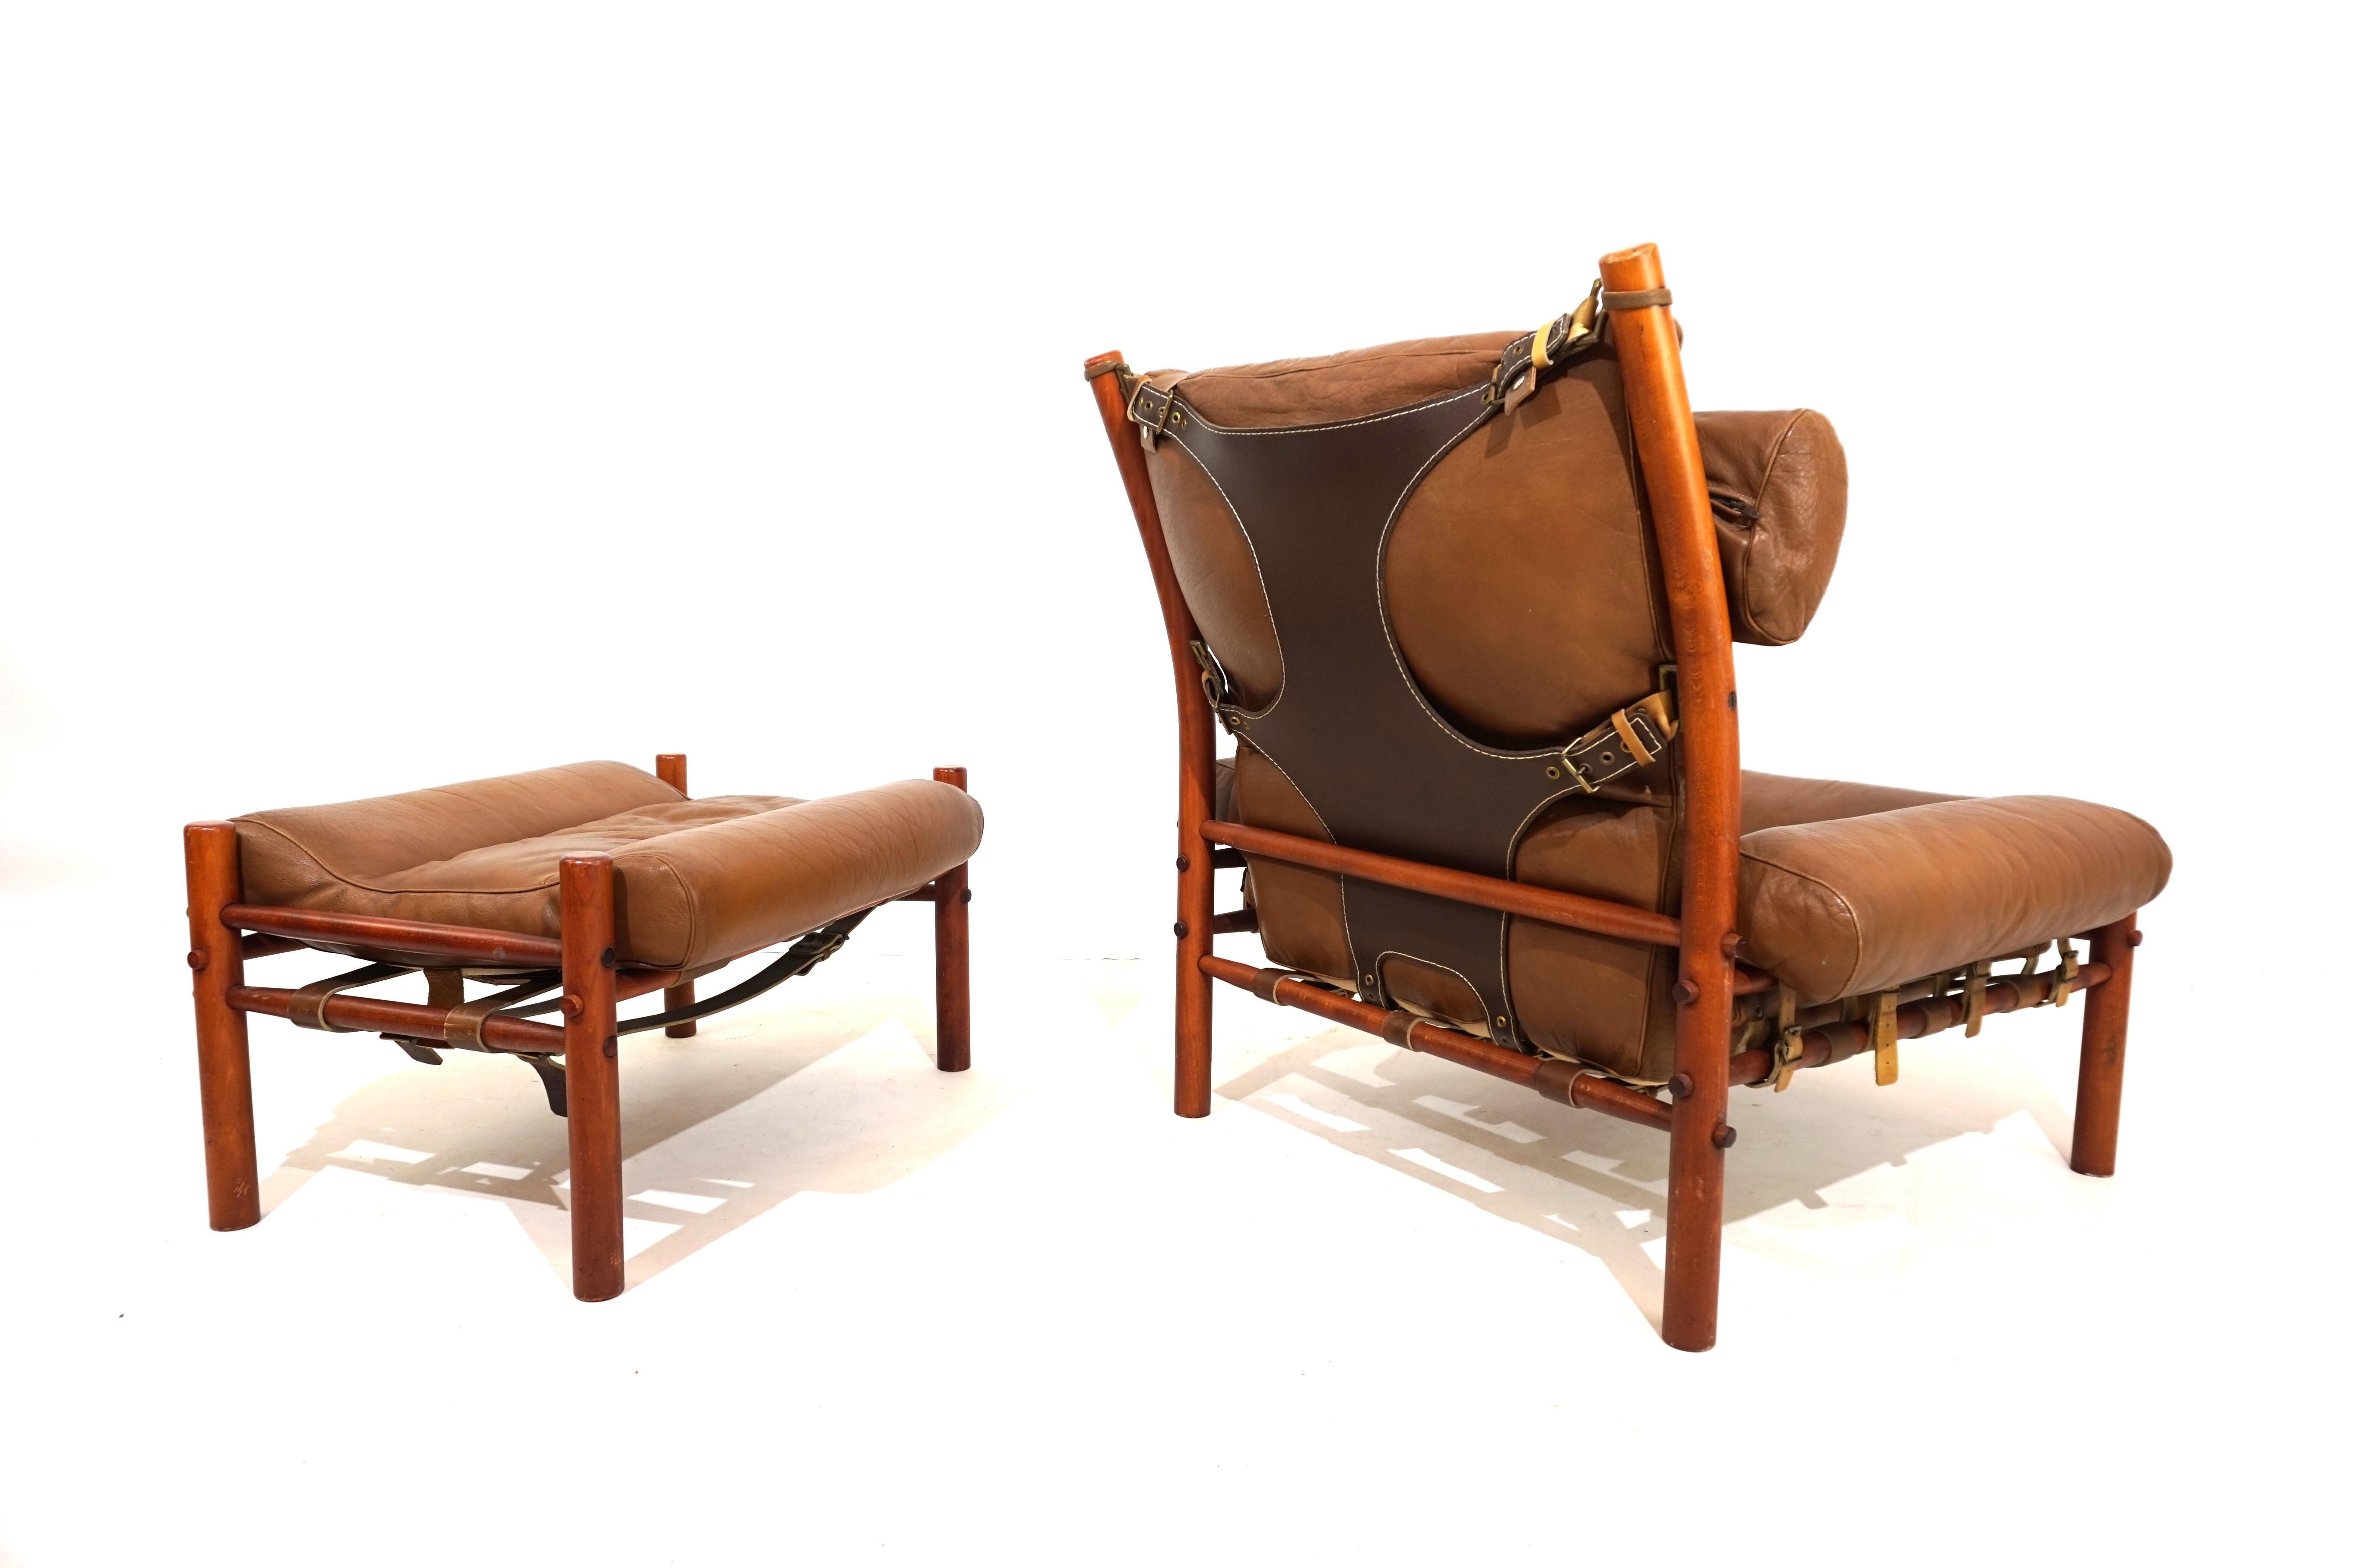 This Inka armchair with ottoman made of caramel-colored aniline leather with dark brown, strong leather on the back comes in excellent condition. The original leather of the armchair and the ottoman is flawless, all fasteners and leather straps are